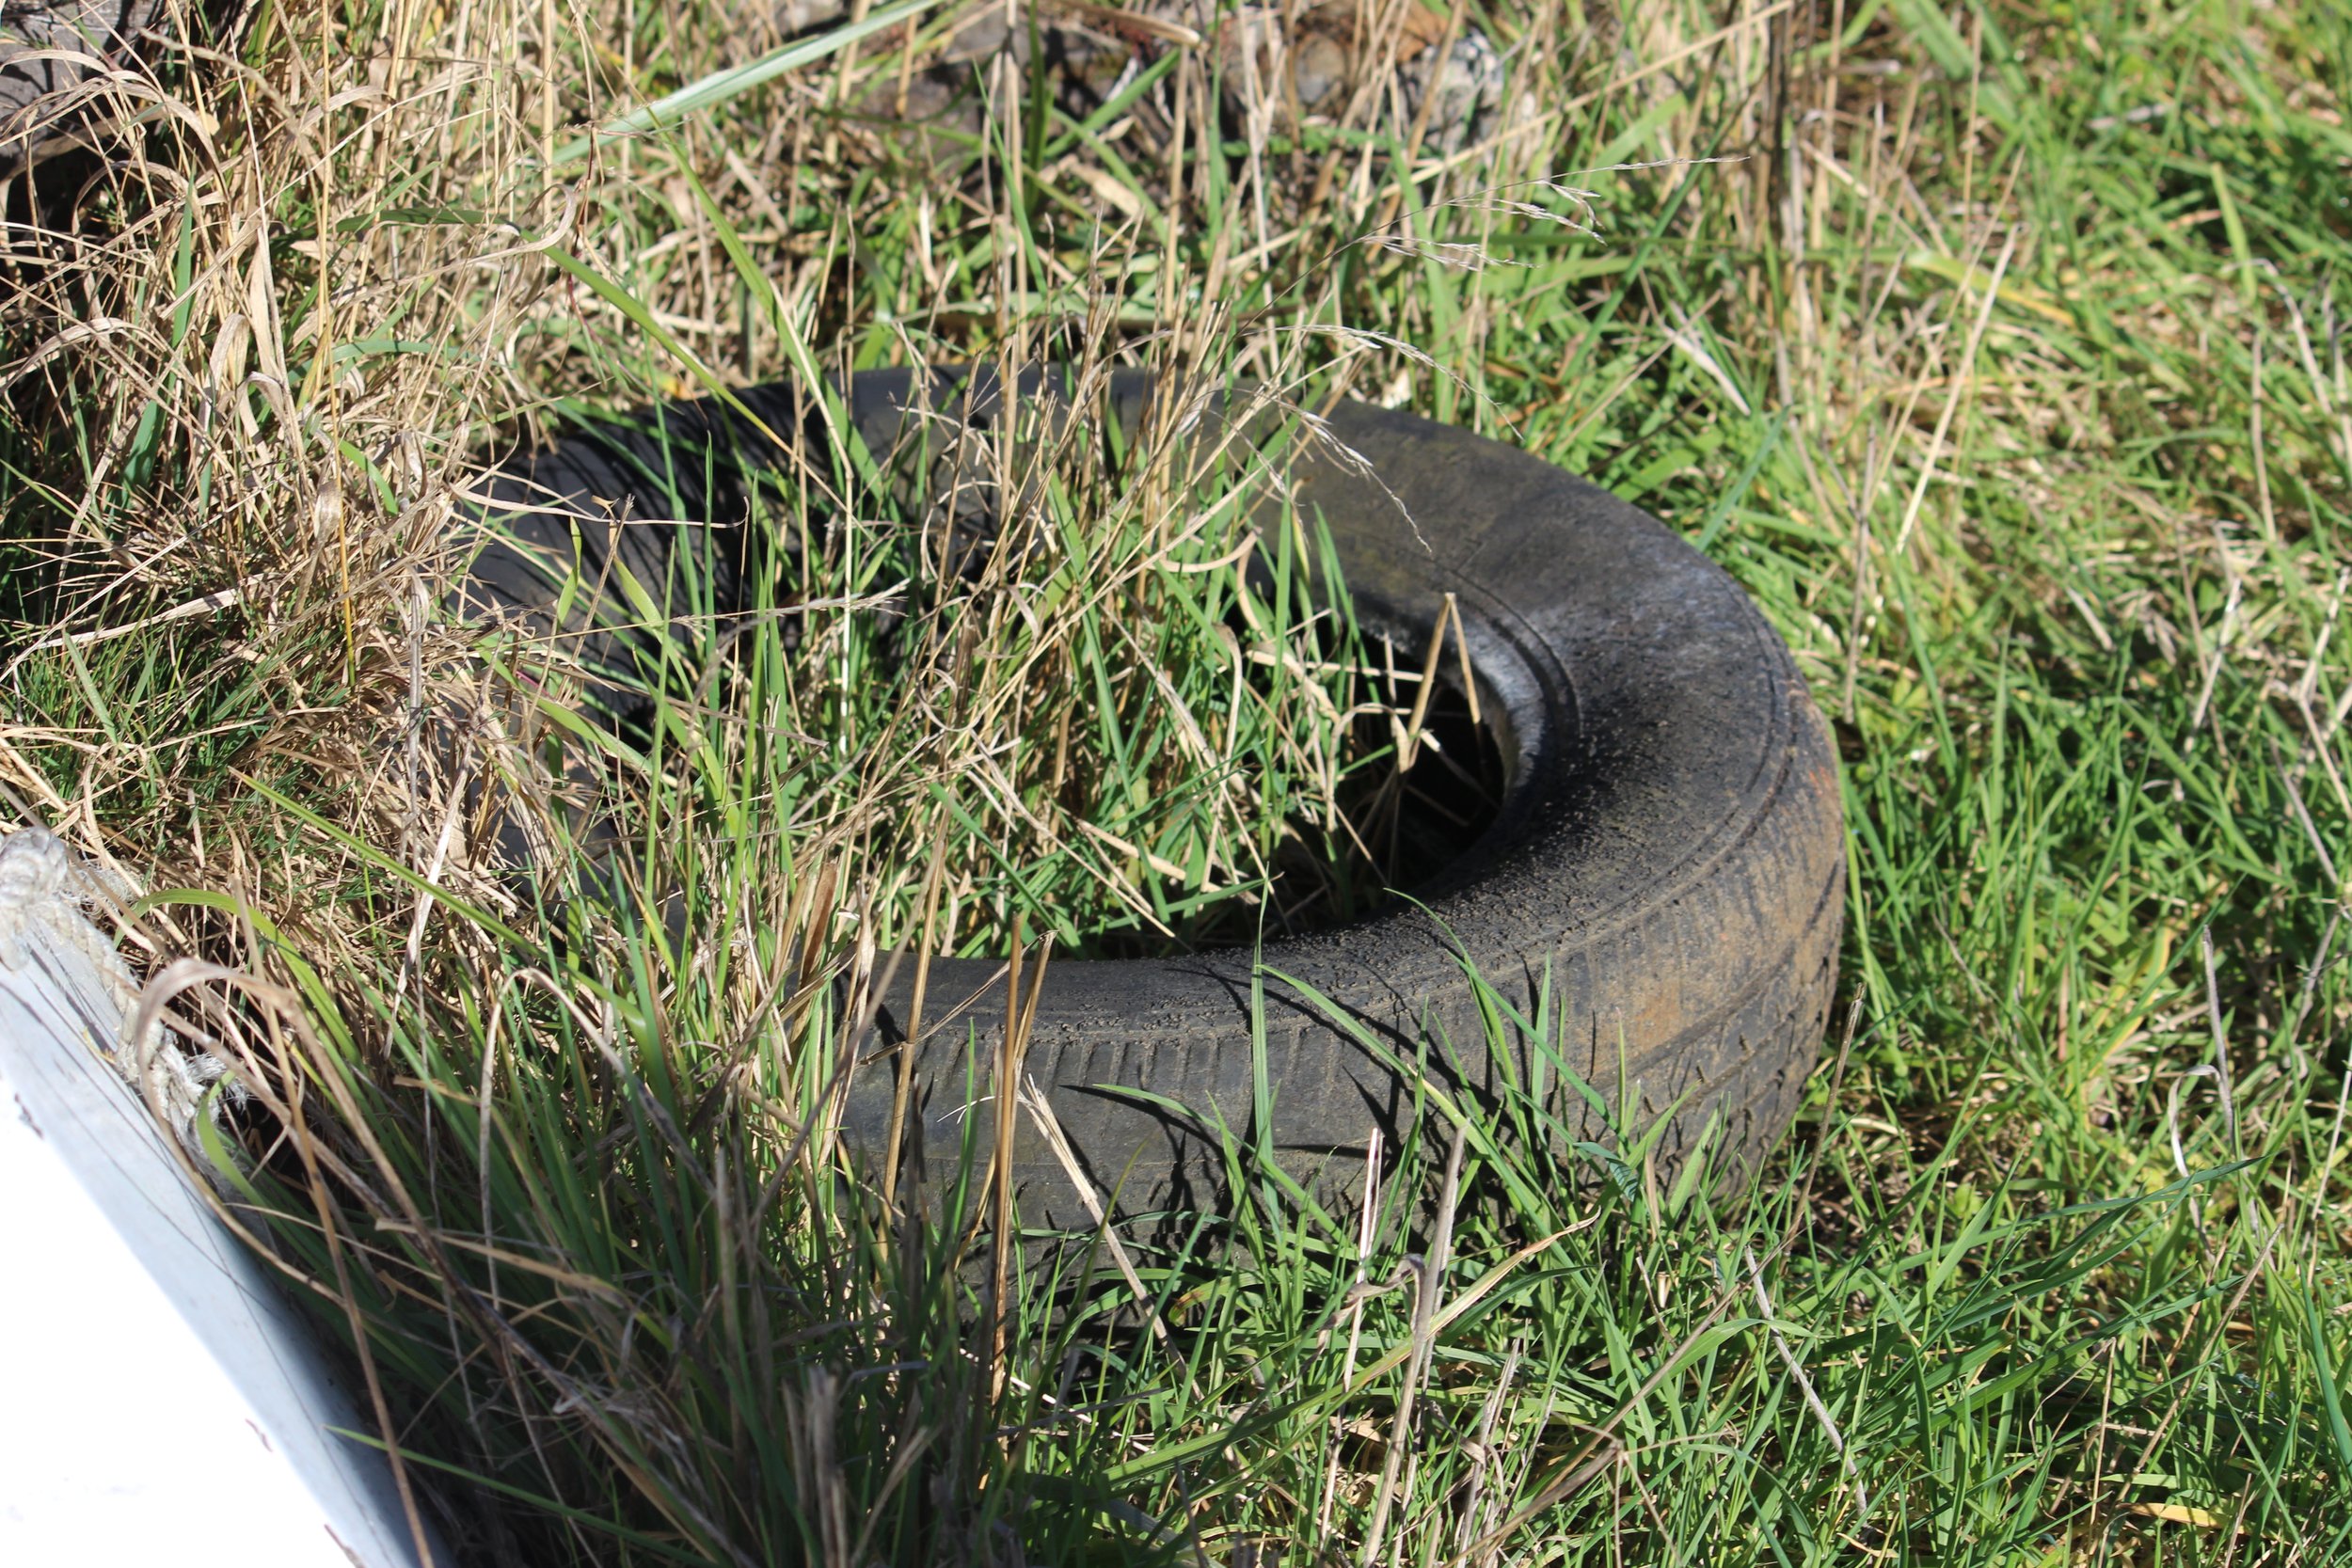 Ross Cooper, Old Tire